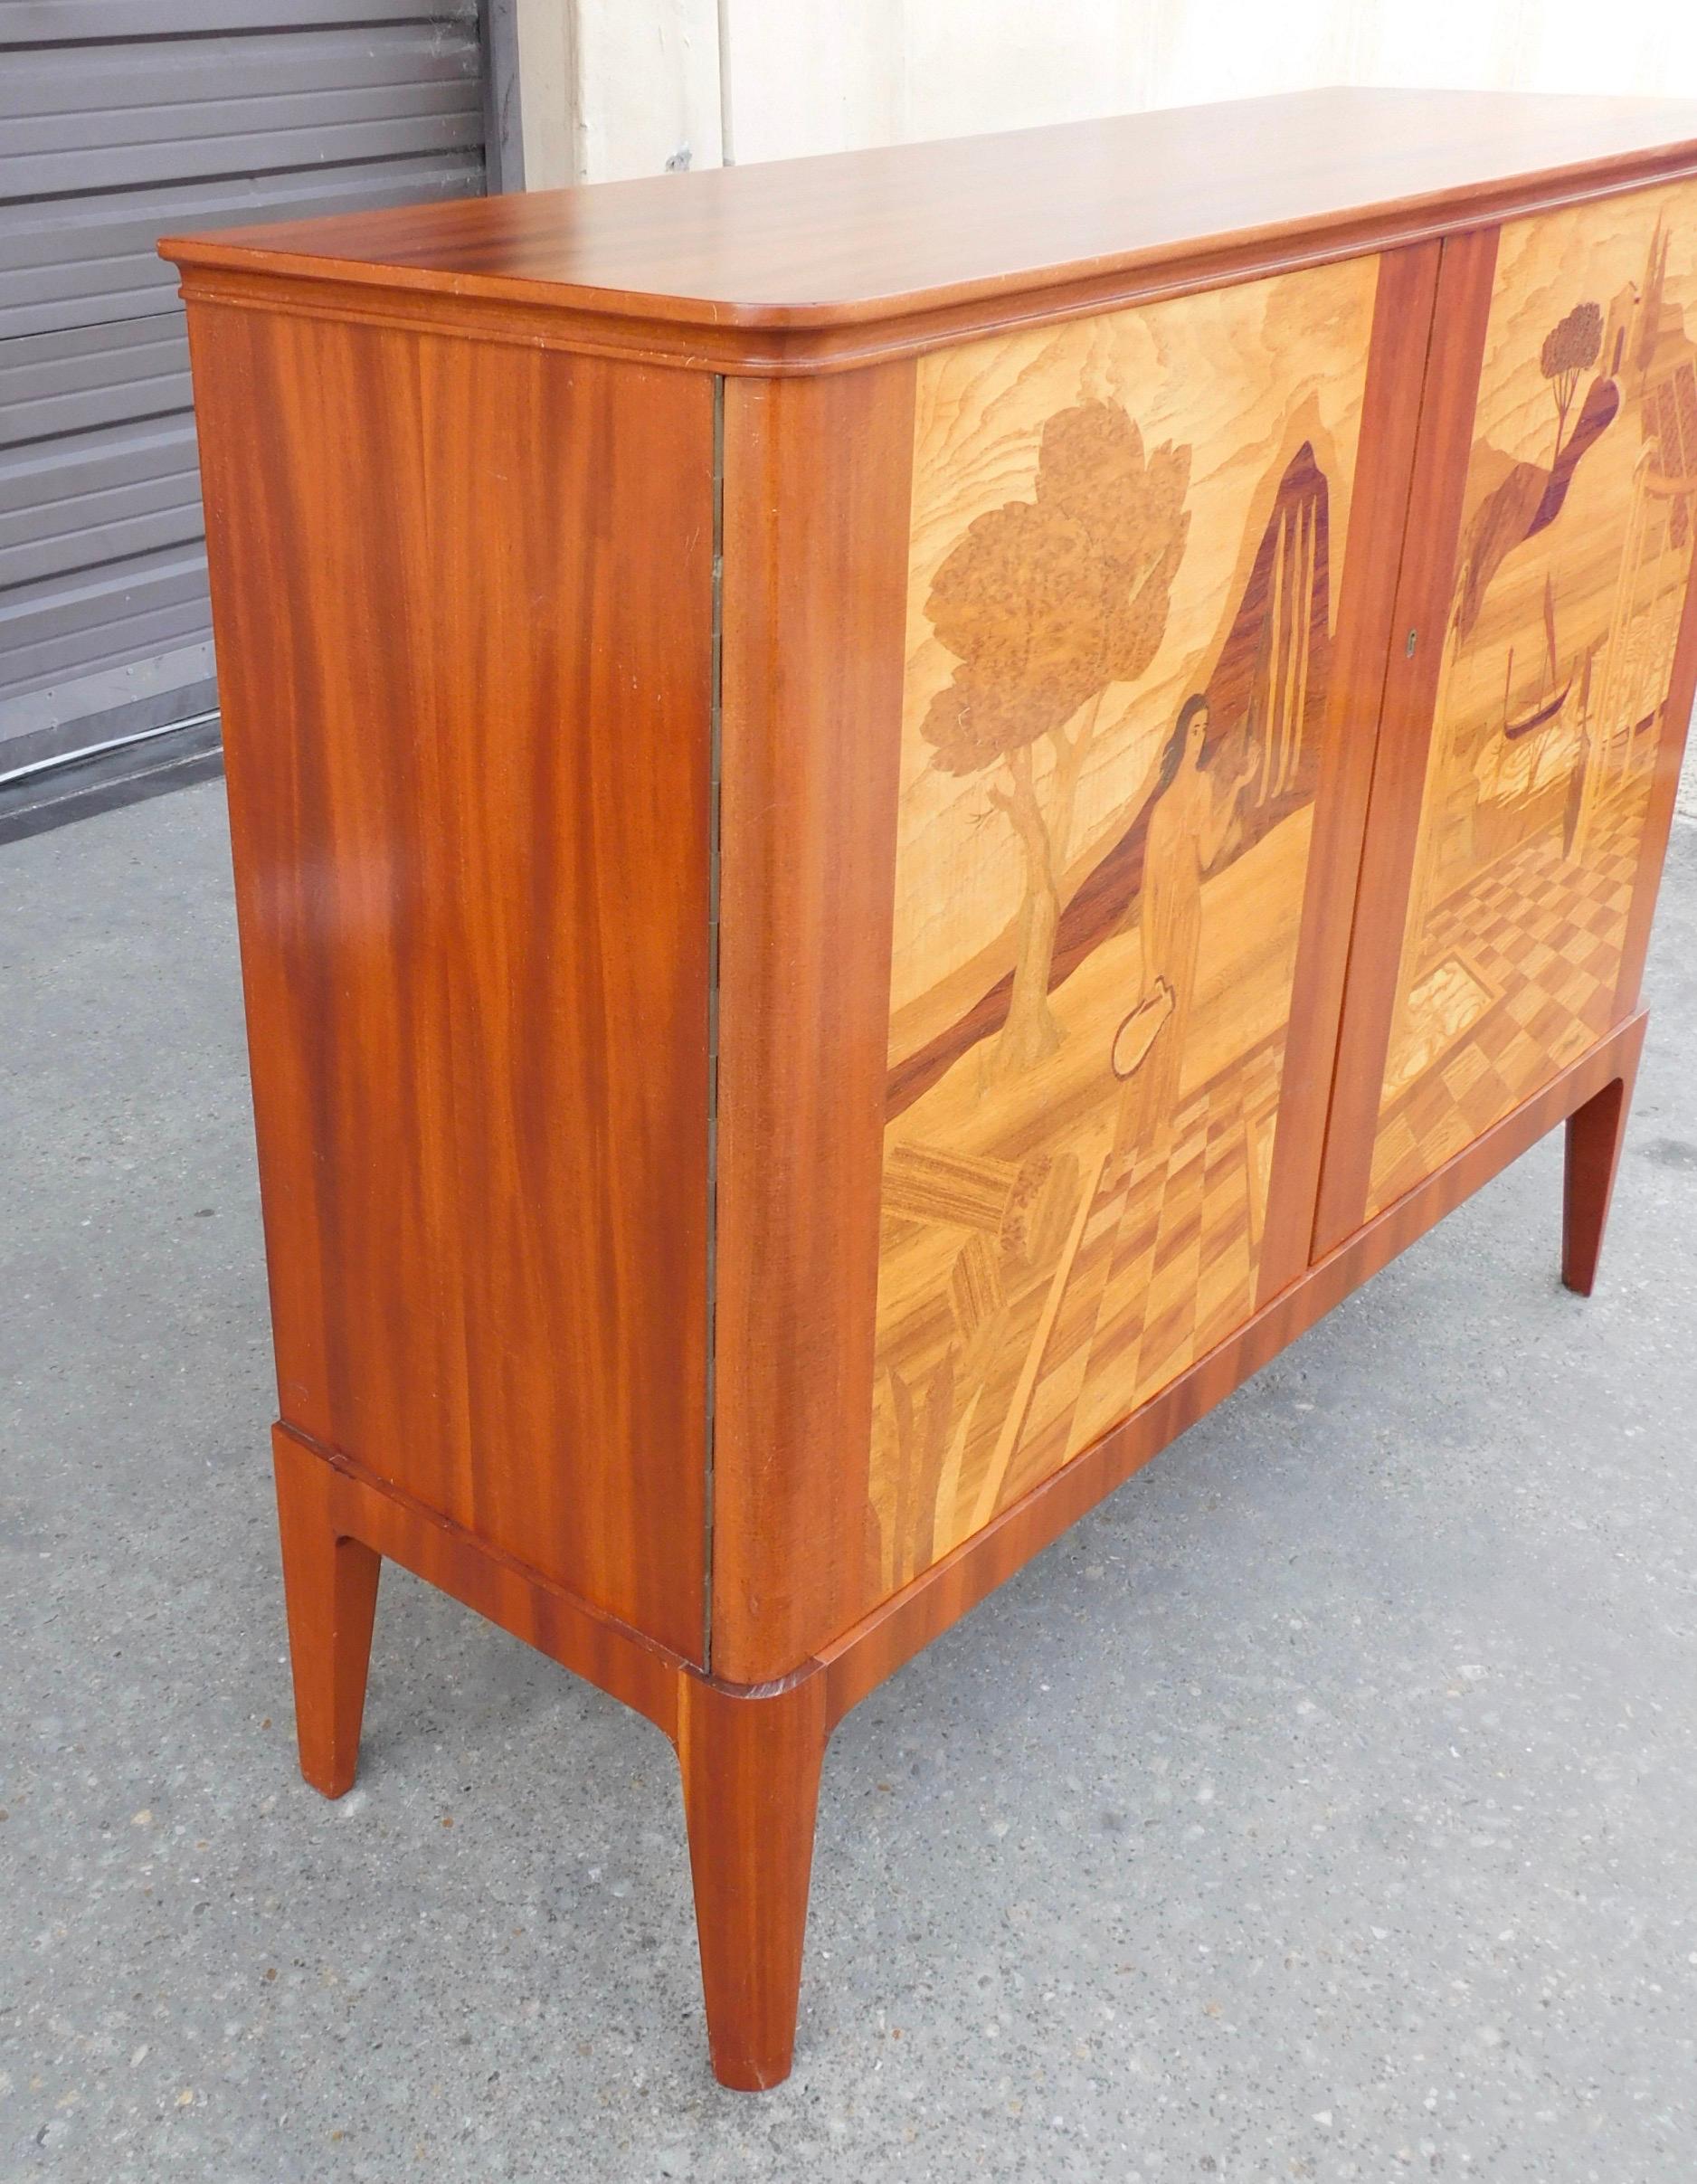 Mahogany Swedish Inlaid Storage Cabinet by Erik Matsson for Mjölby Intarsia, 1943 For Sale